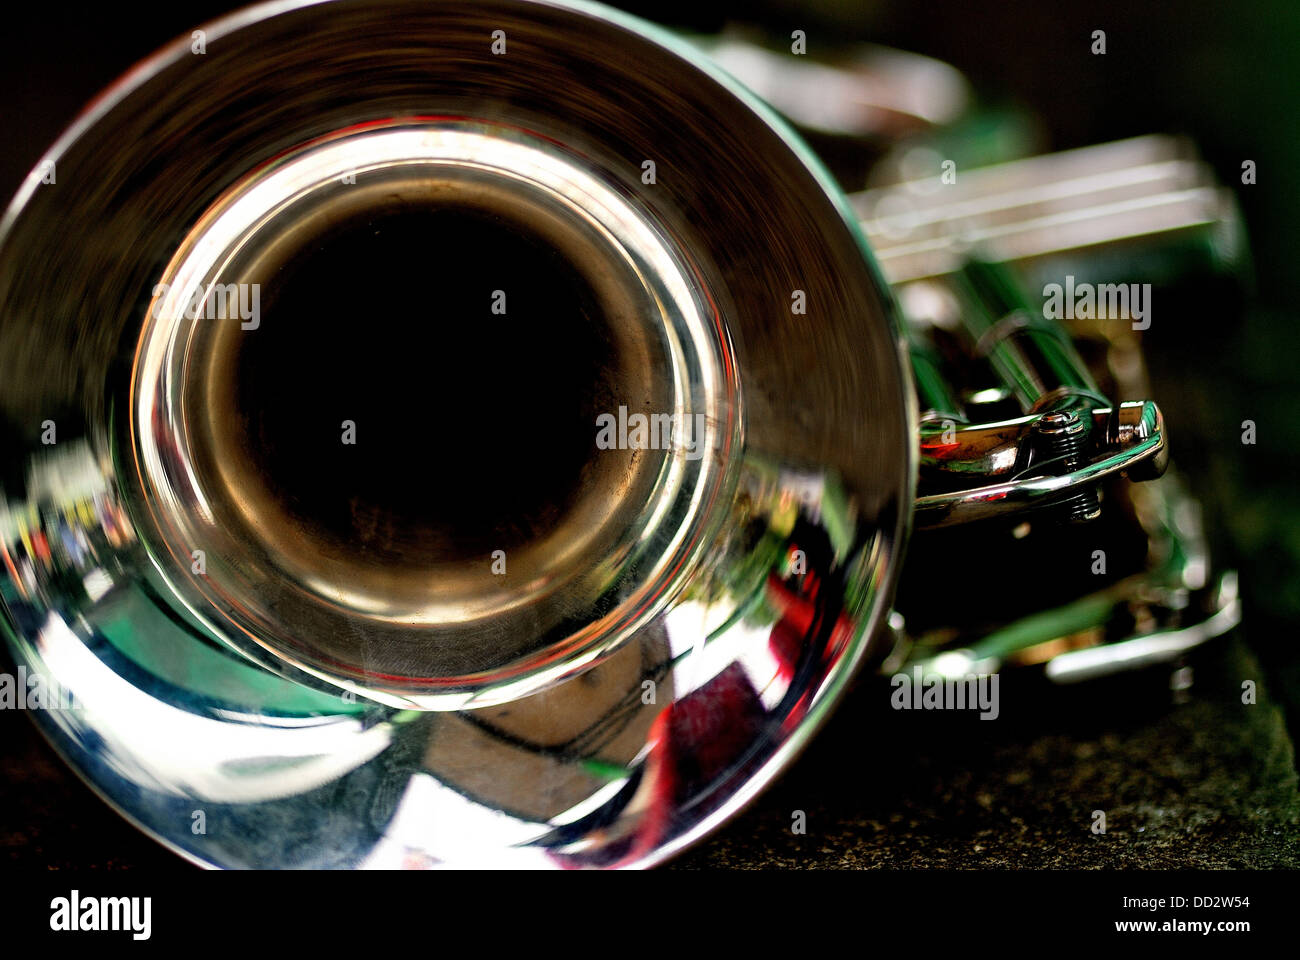 Looking into the mouth of a trumpet Stock Photo